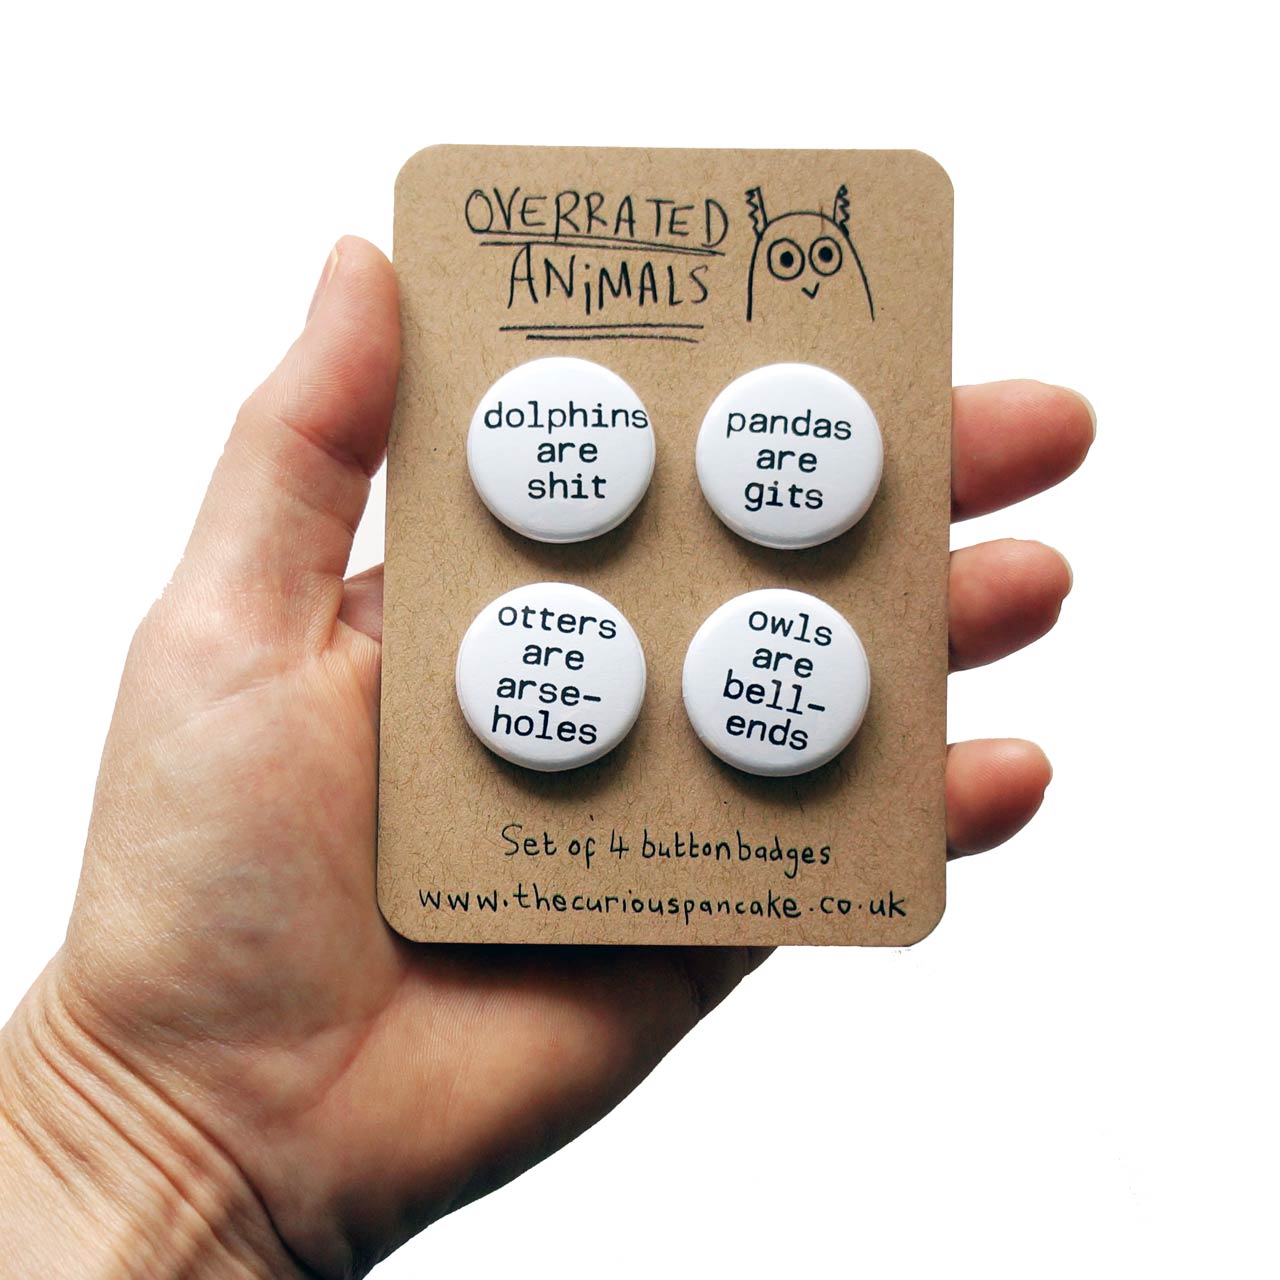 Overrated Animals 4 Button Badge Set